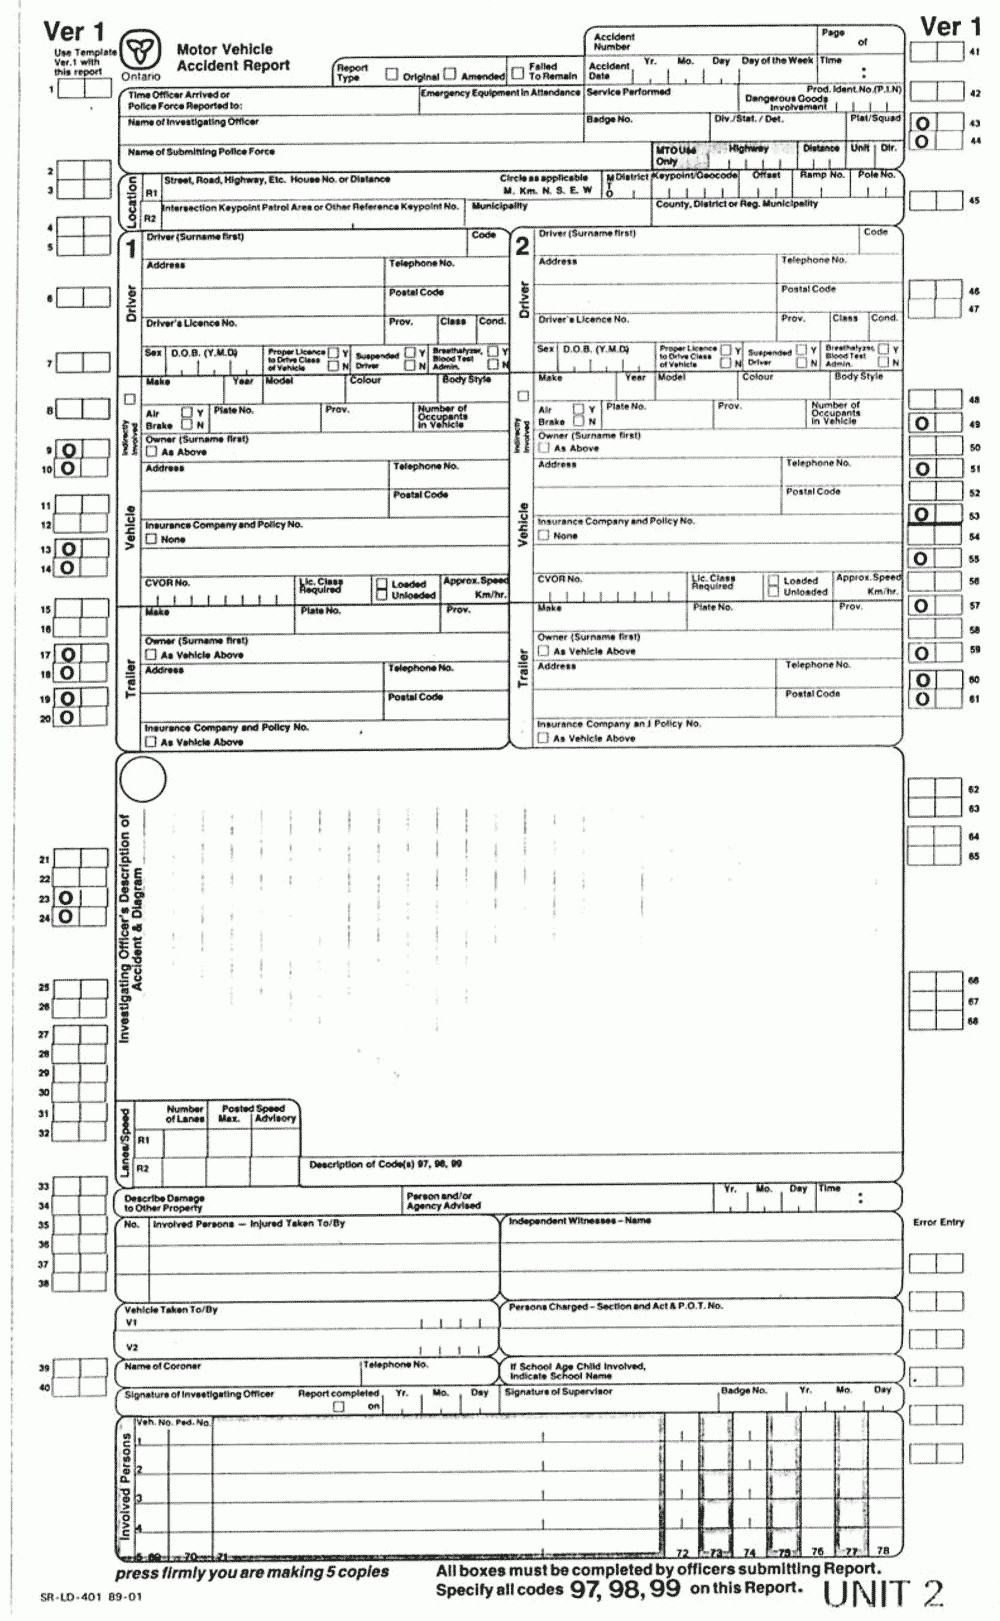 Workers Compensation Accident Report Form | Sample Customer With Regard To Motor Vehicle Accident Report Form Template